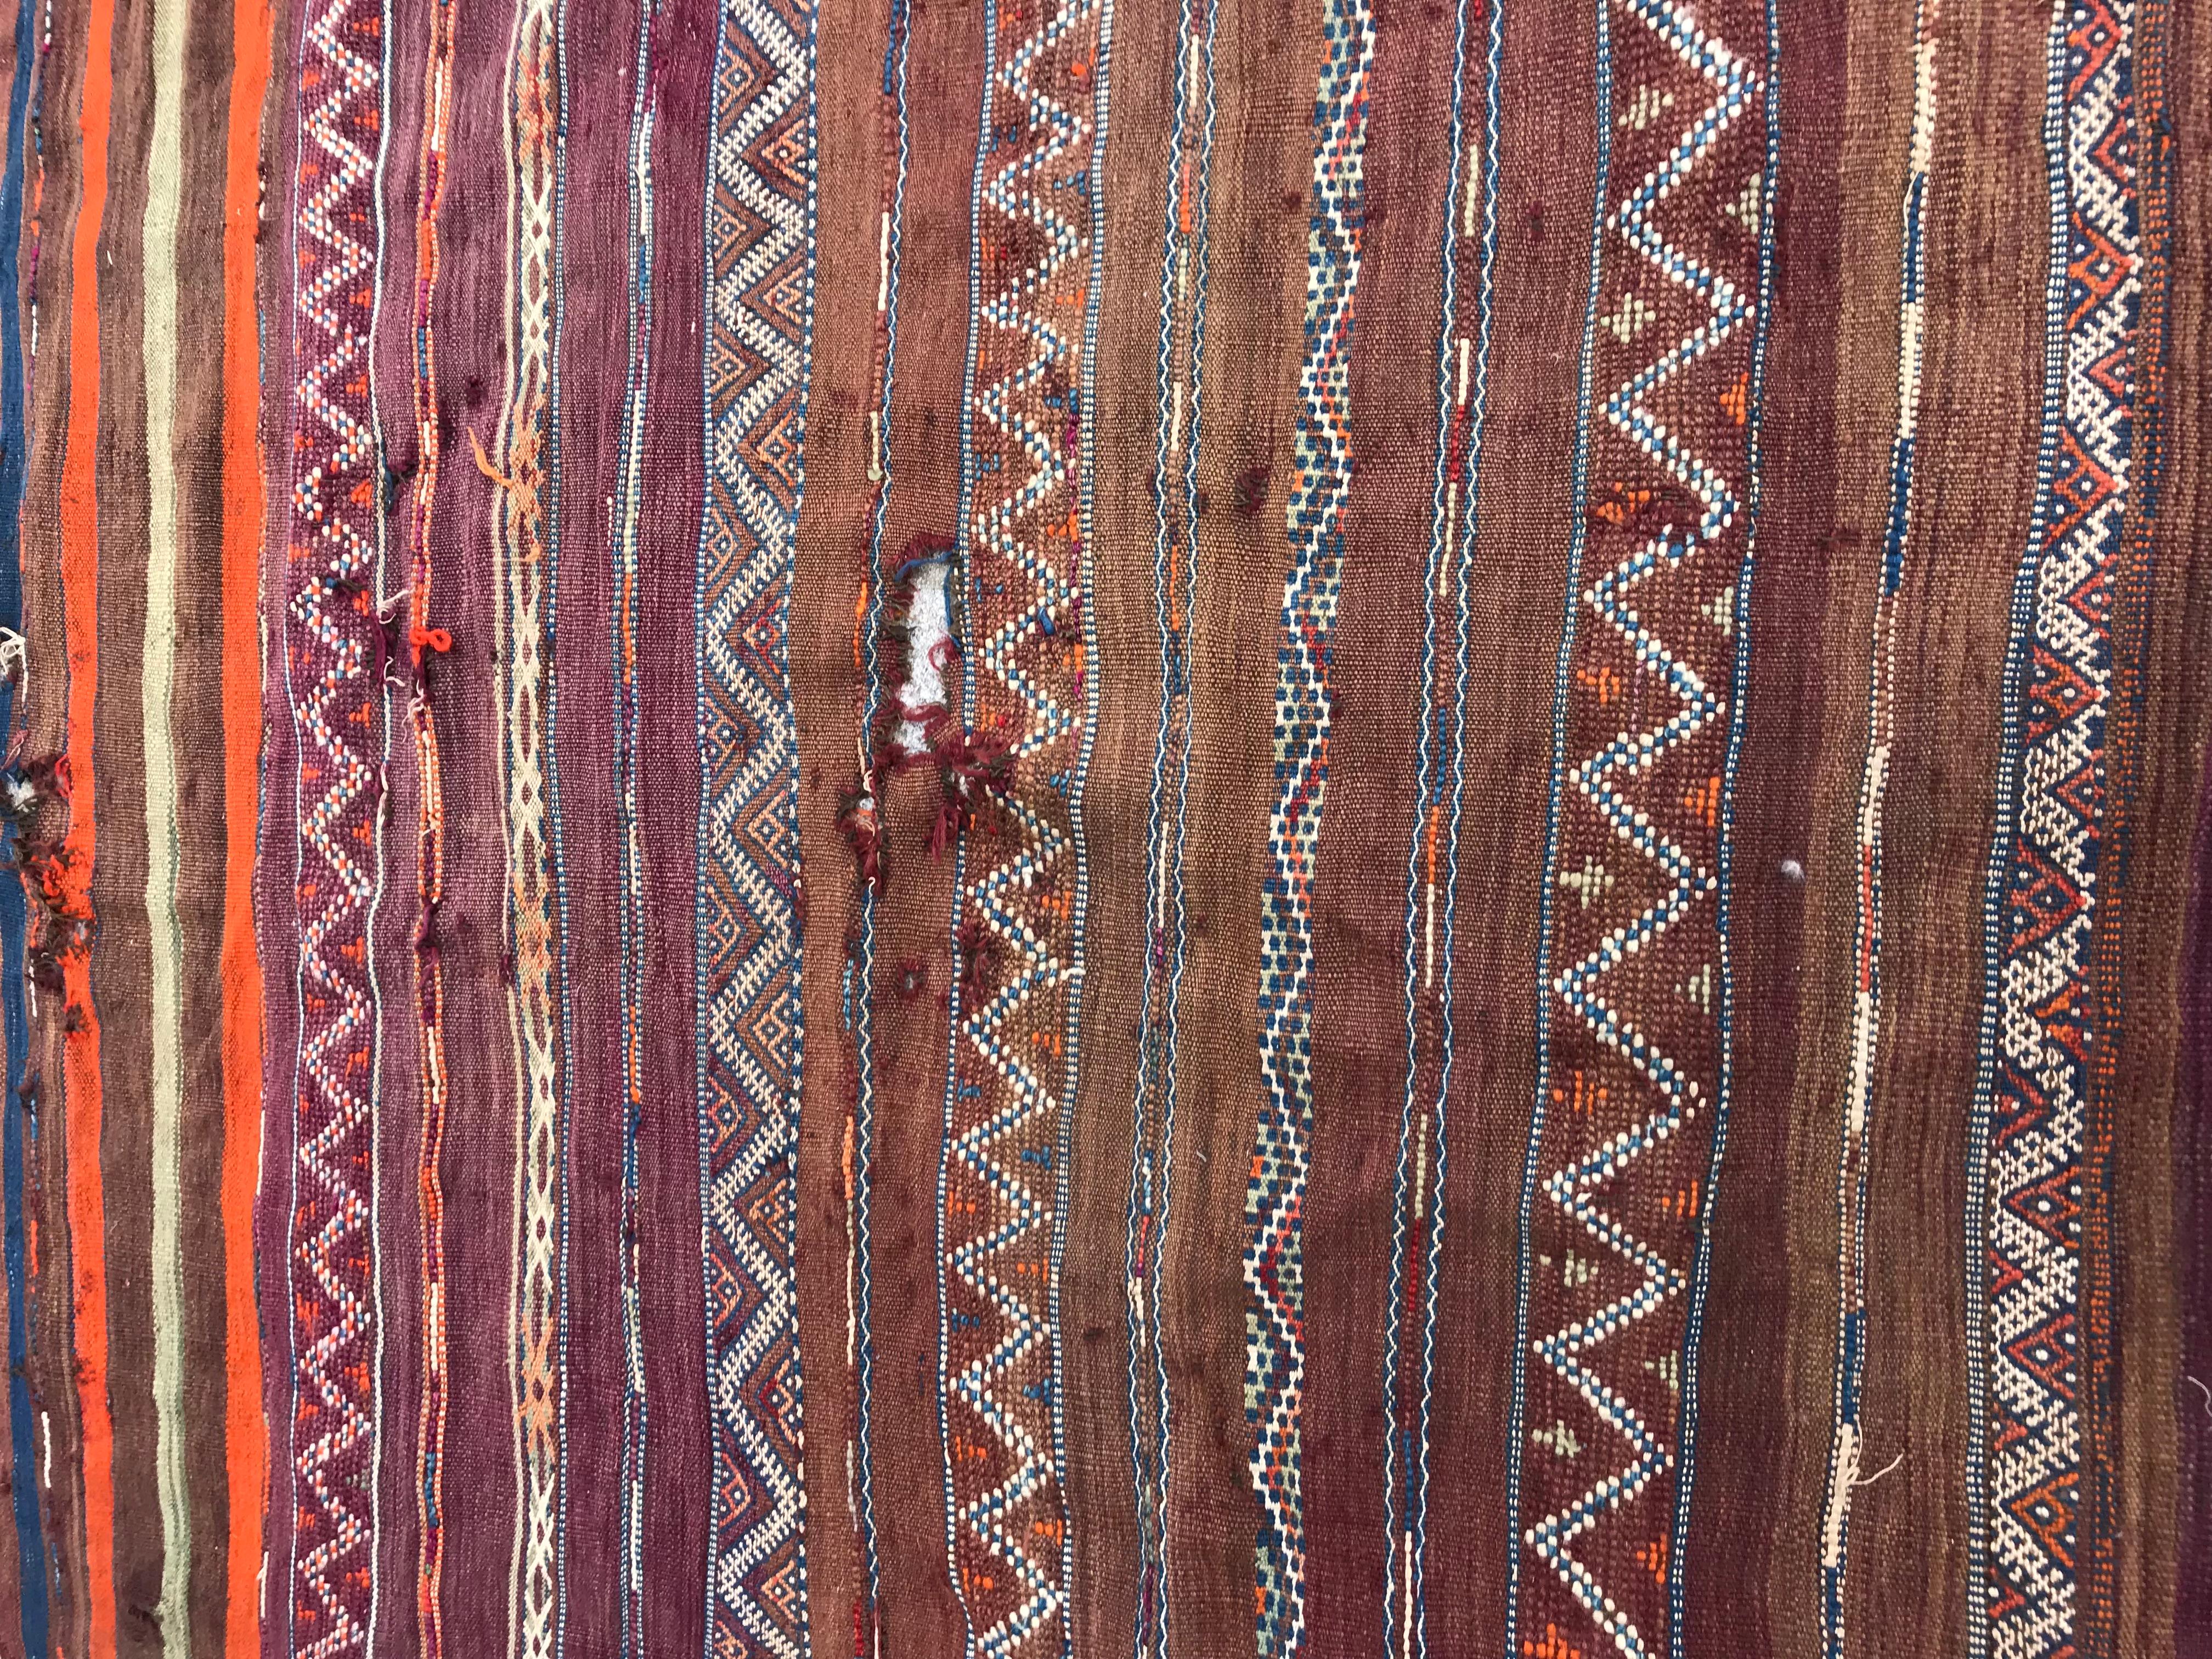 Early 20th century tribal Moroccan Kilim with tribal and geometrical design and beautiful colors with purple, orange, brown, blue, and green, entirely handwoven with wool on wool foundation.